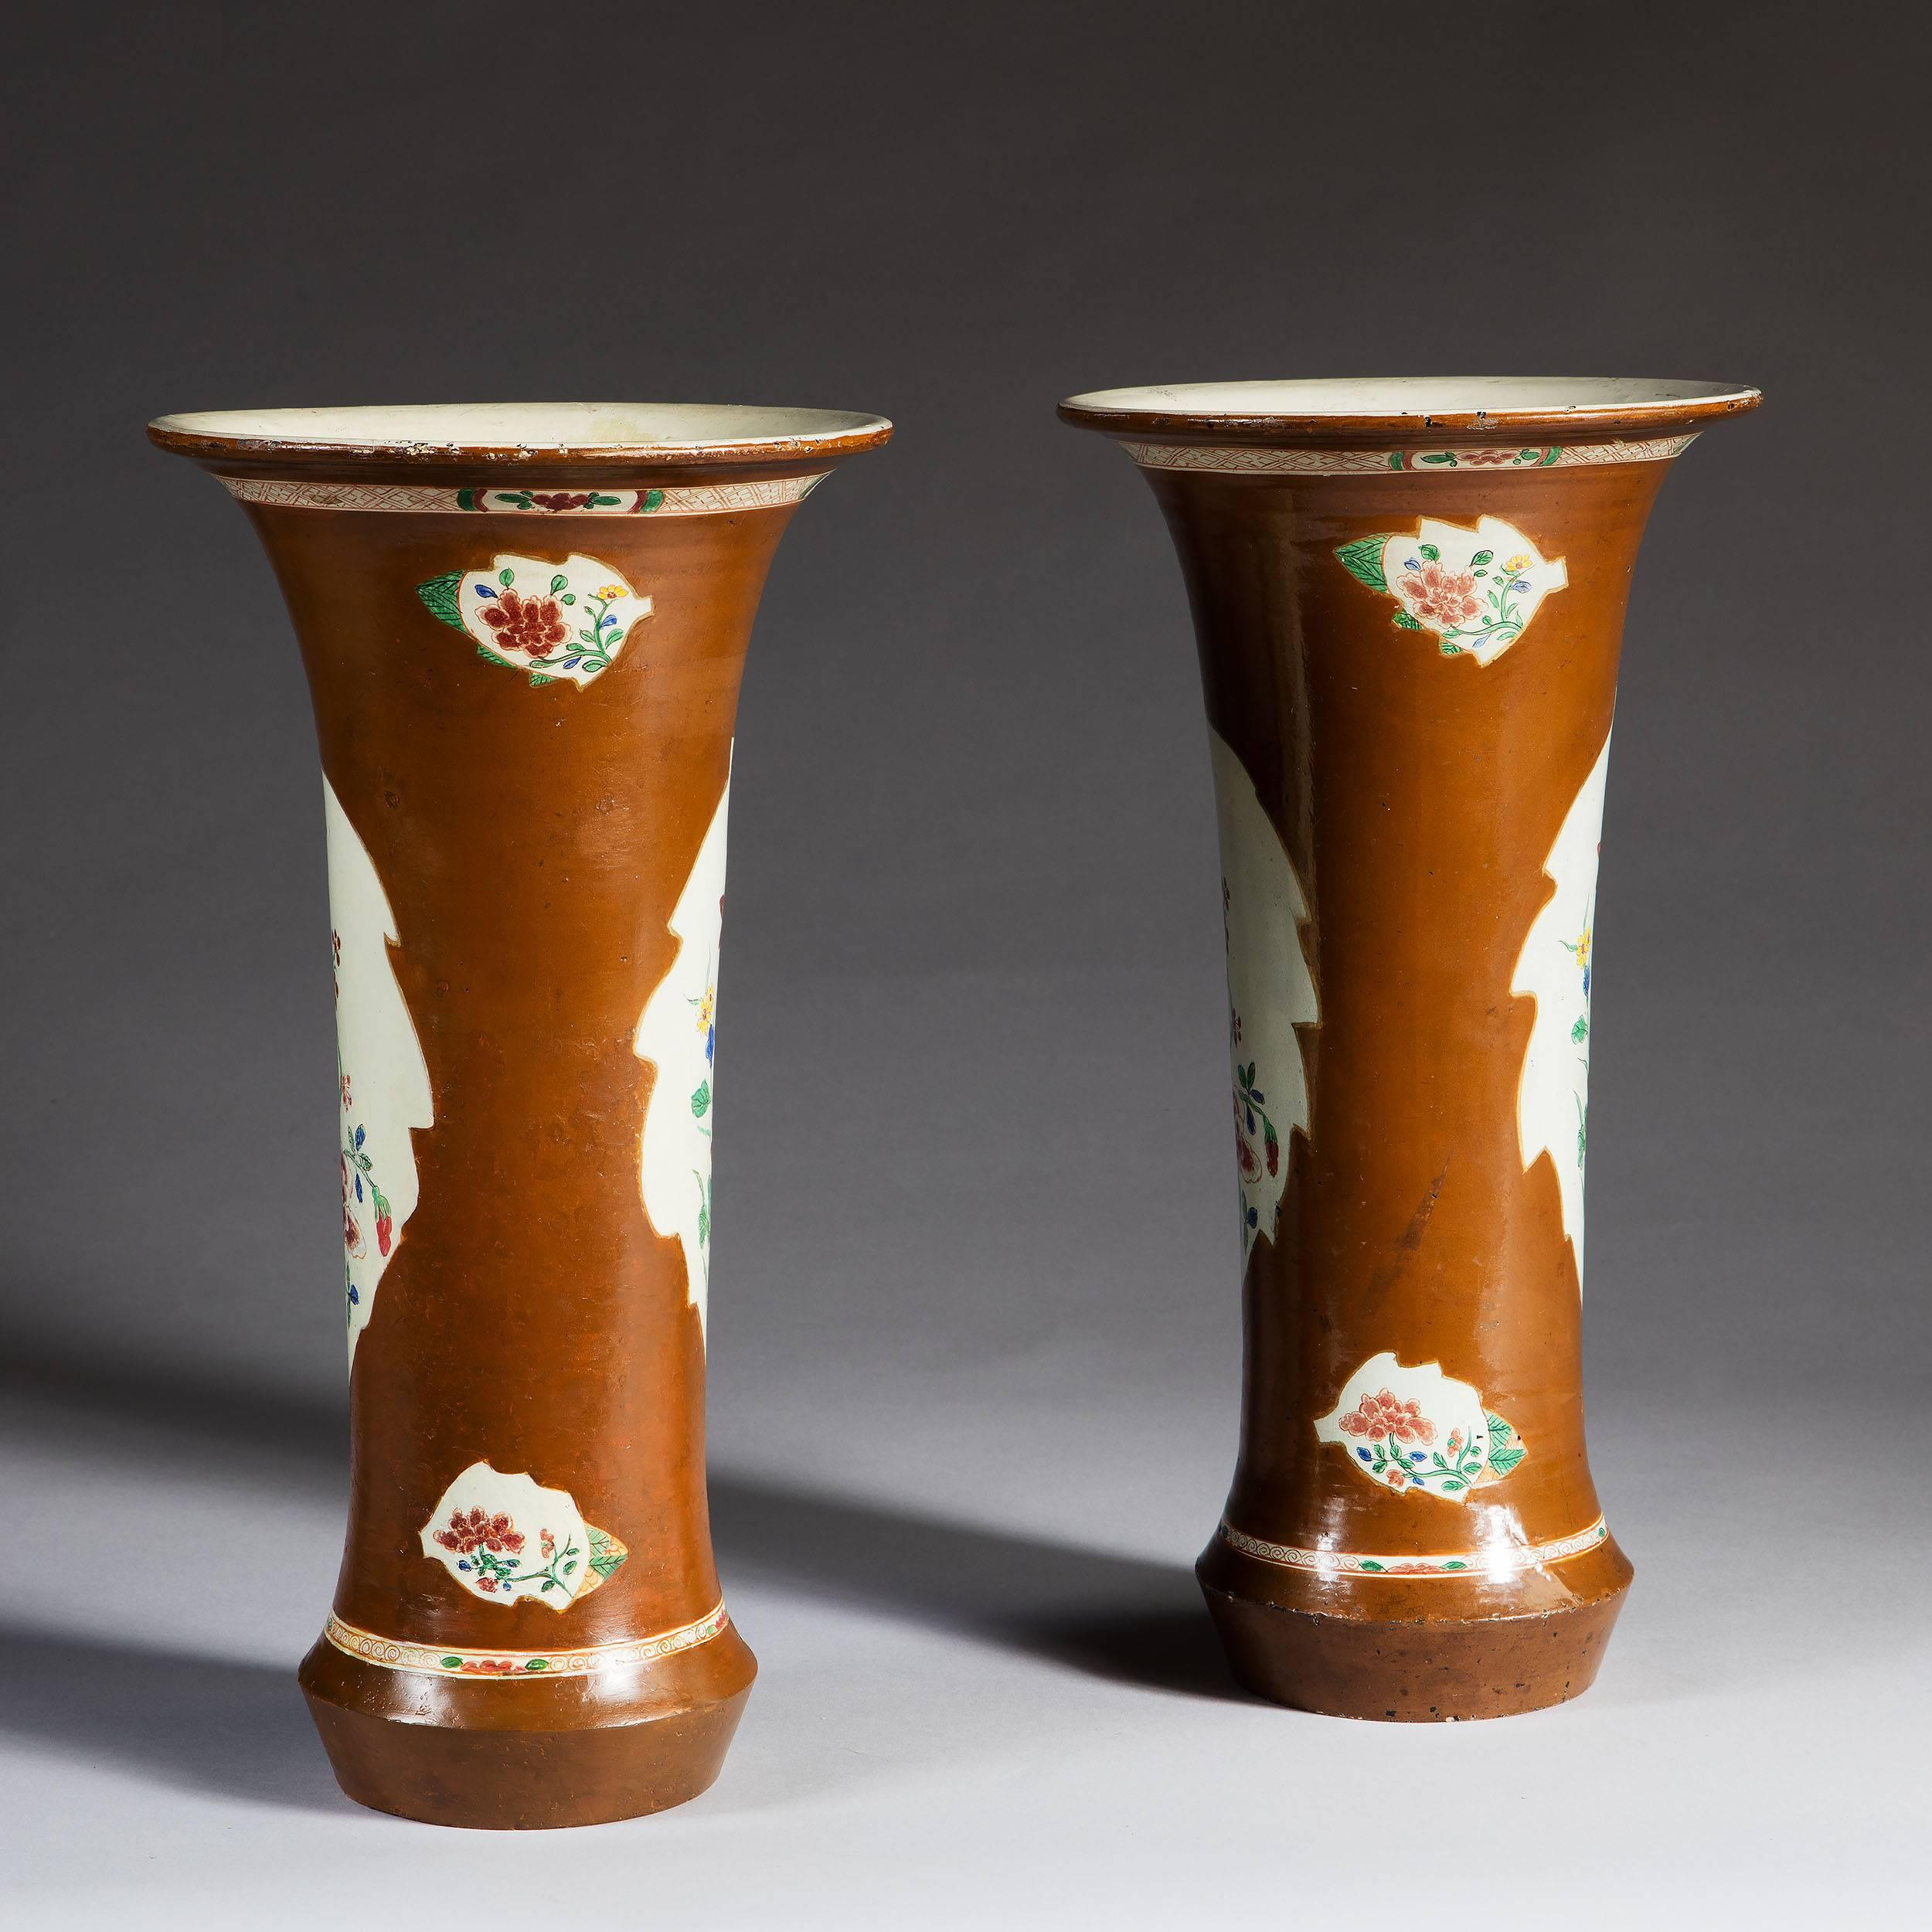 These trumpet vases are European and were made to copy Chinese porcelain vases being exported to Europe from China. 

This pattern is known as Batavia and is characteristic with the five-color panels within a brown lustrous glazed border.